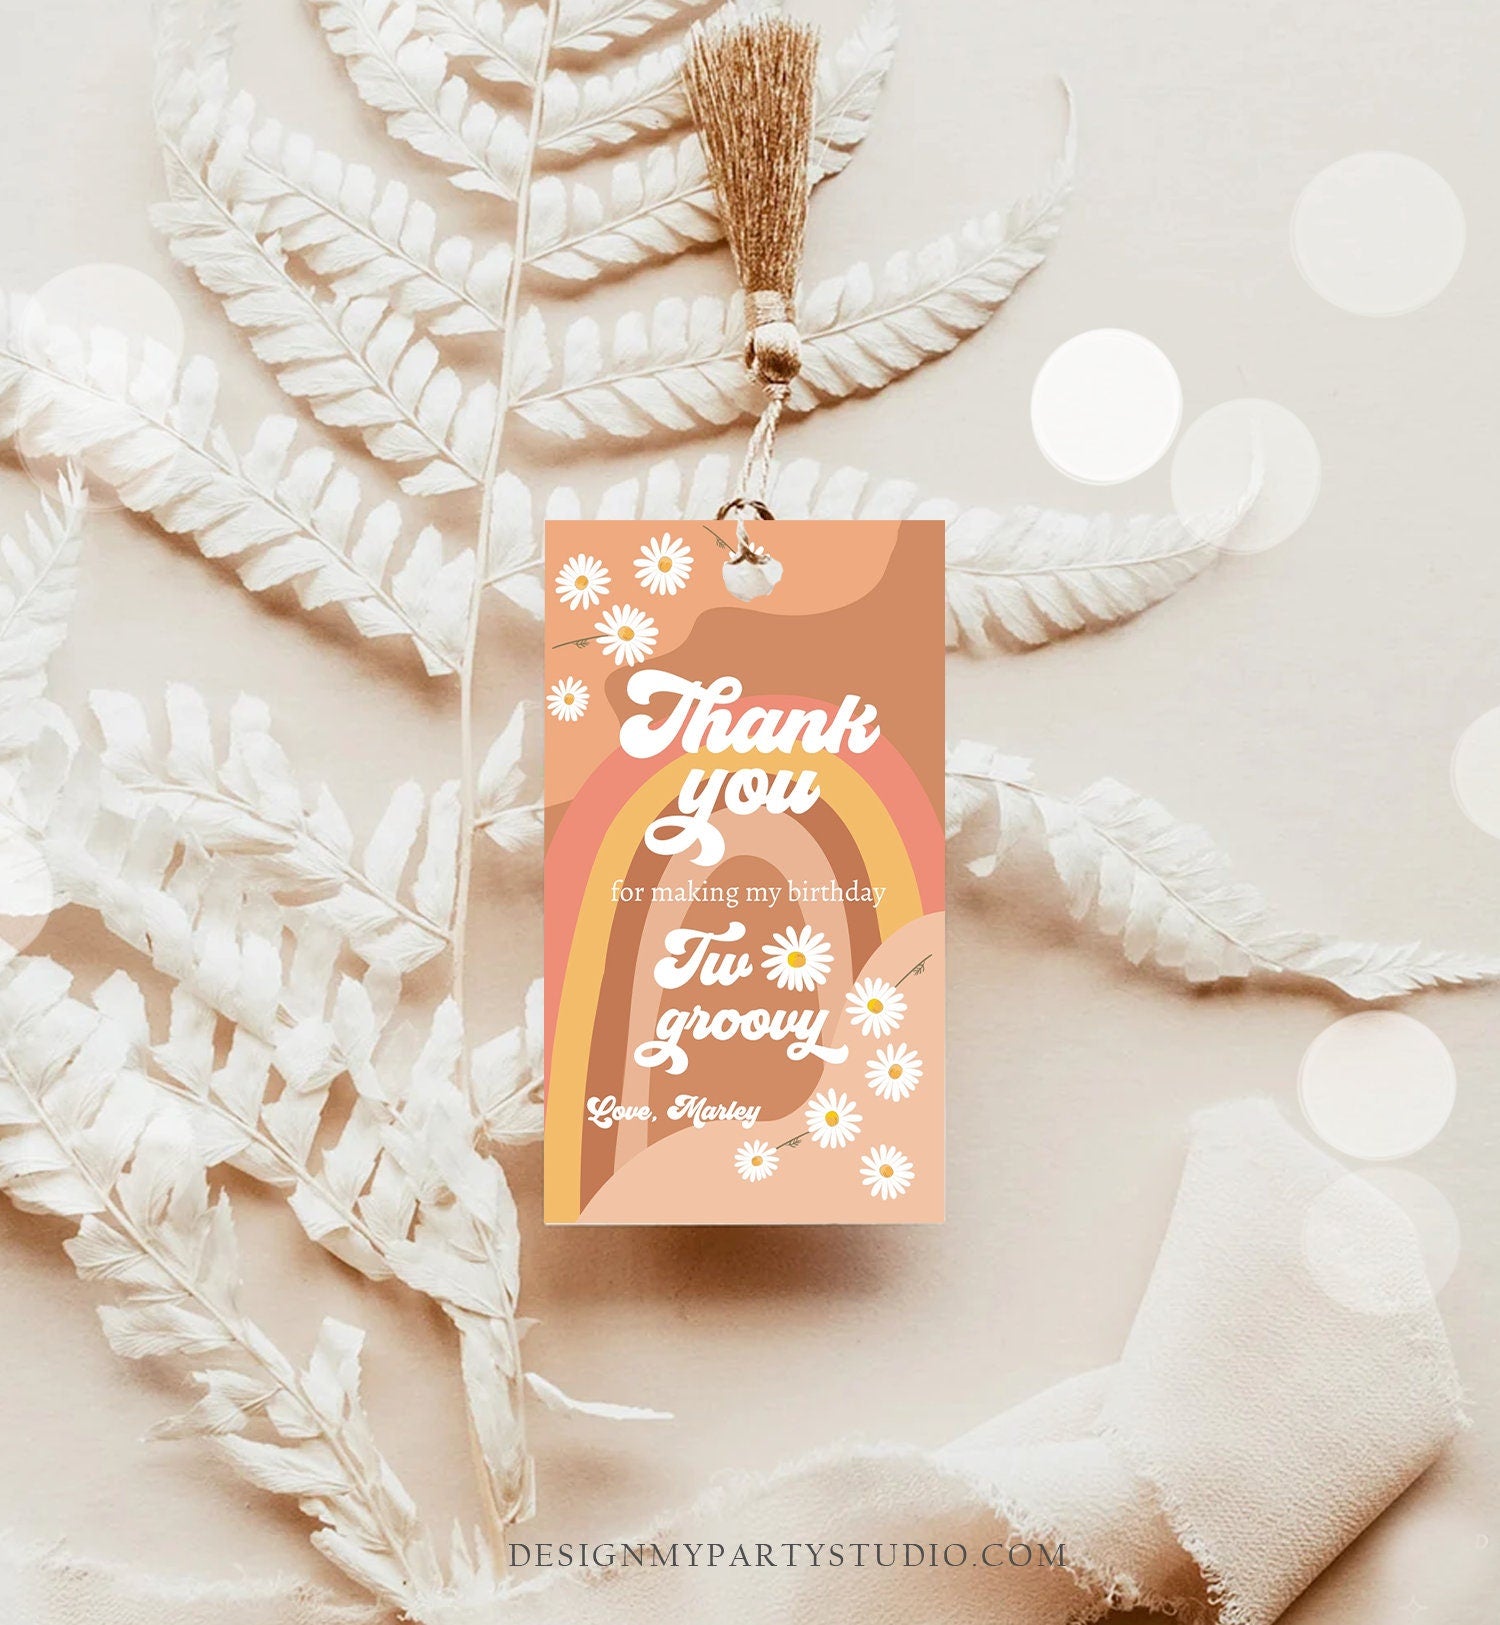 Editable Retro Daisy Favor Tags 2nd Two Groovy Birthday Thank you Tags Festival Gift tags 70s Floral Hippie Template Corjl PRINTABLE 0428